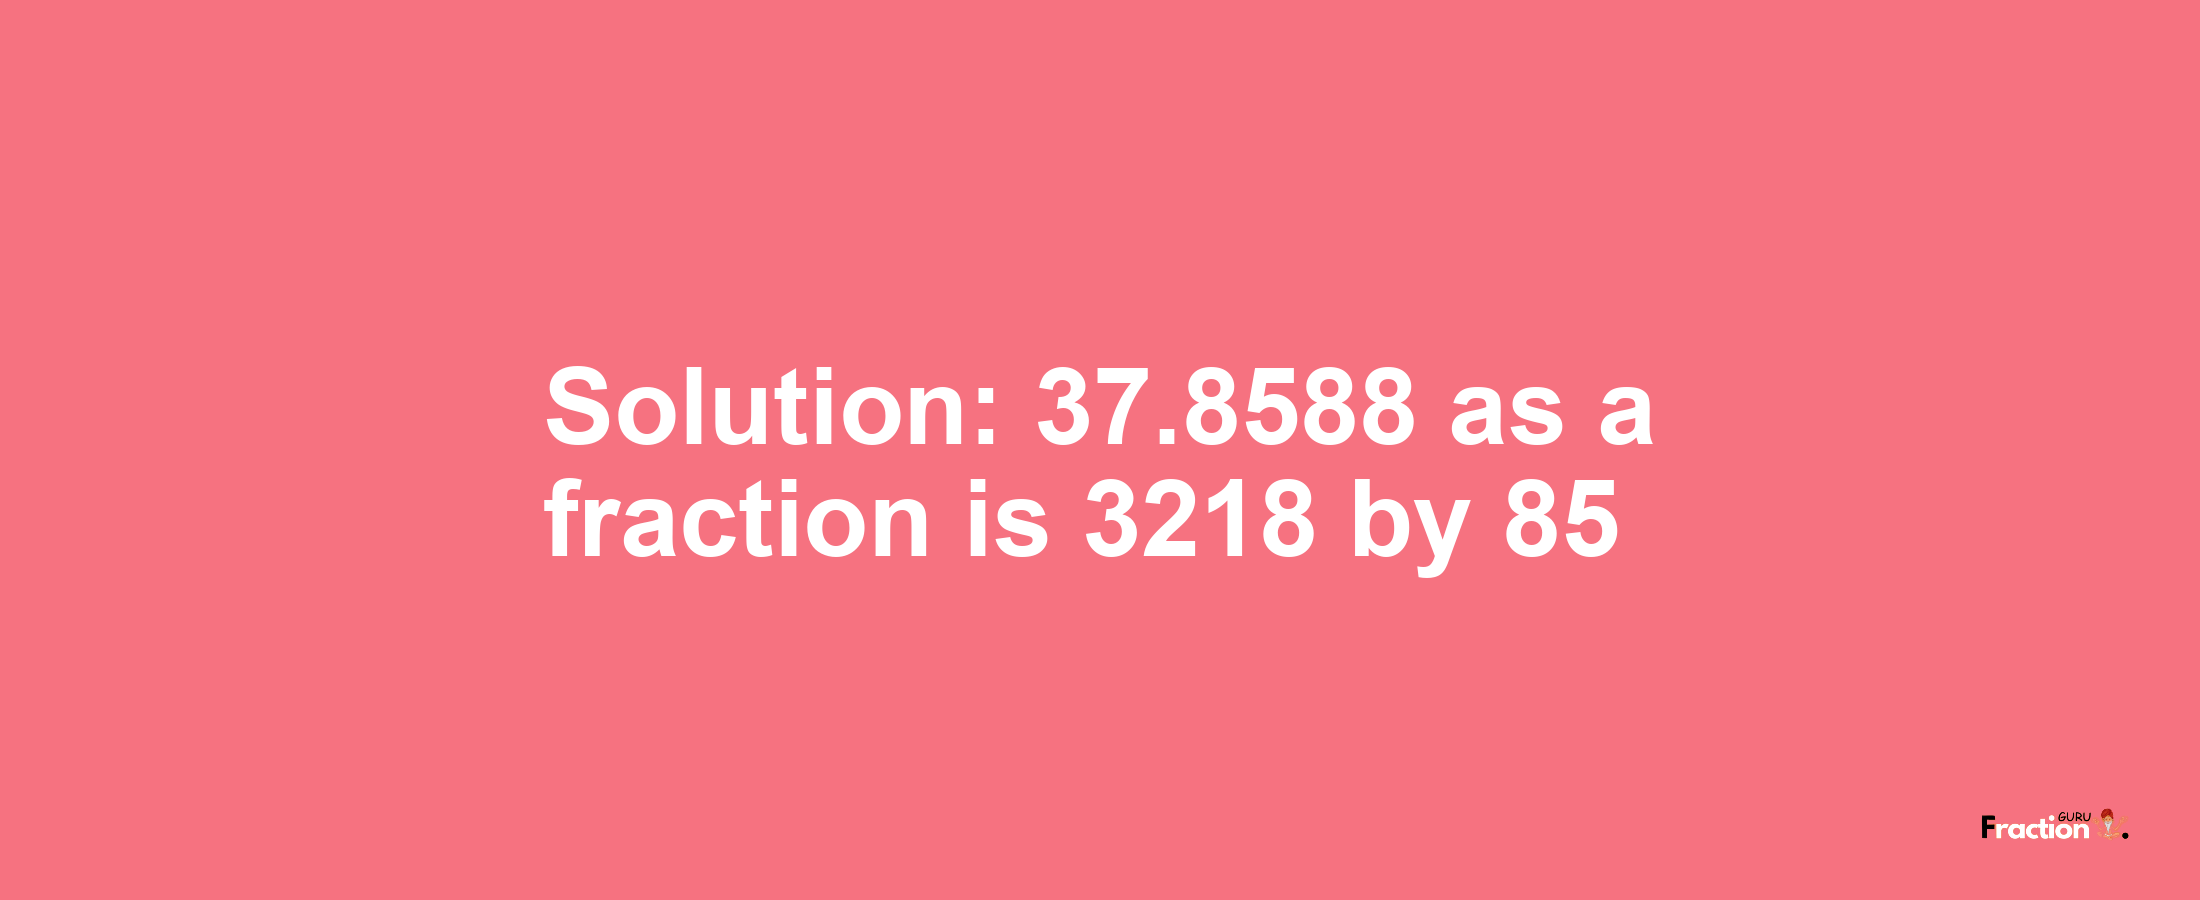 Solution:37.8588 as a fraction is 3218/85